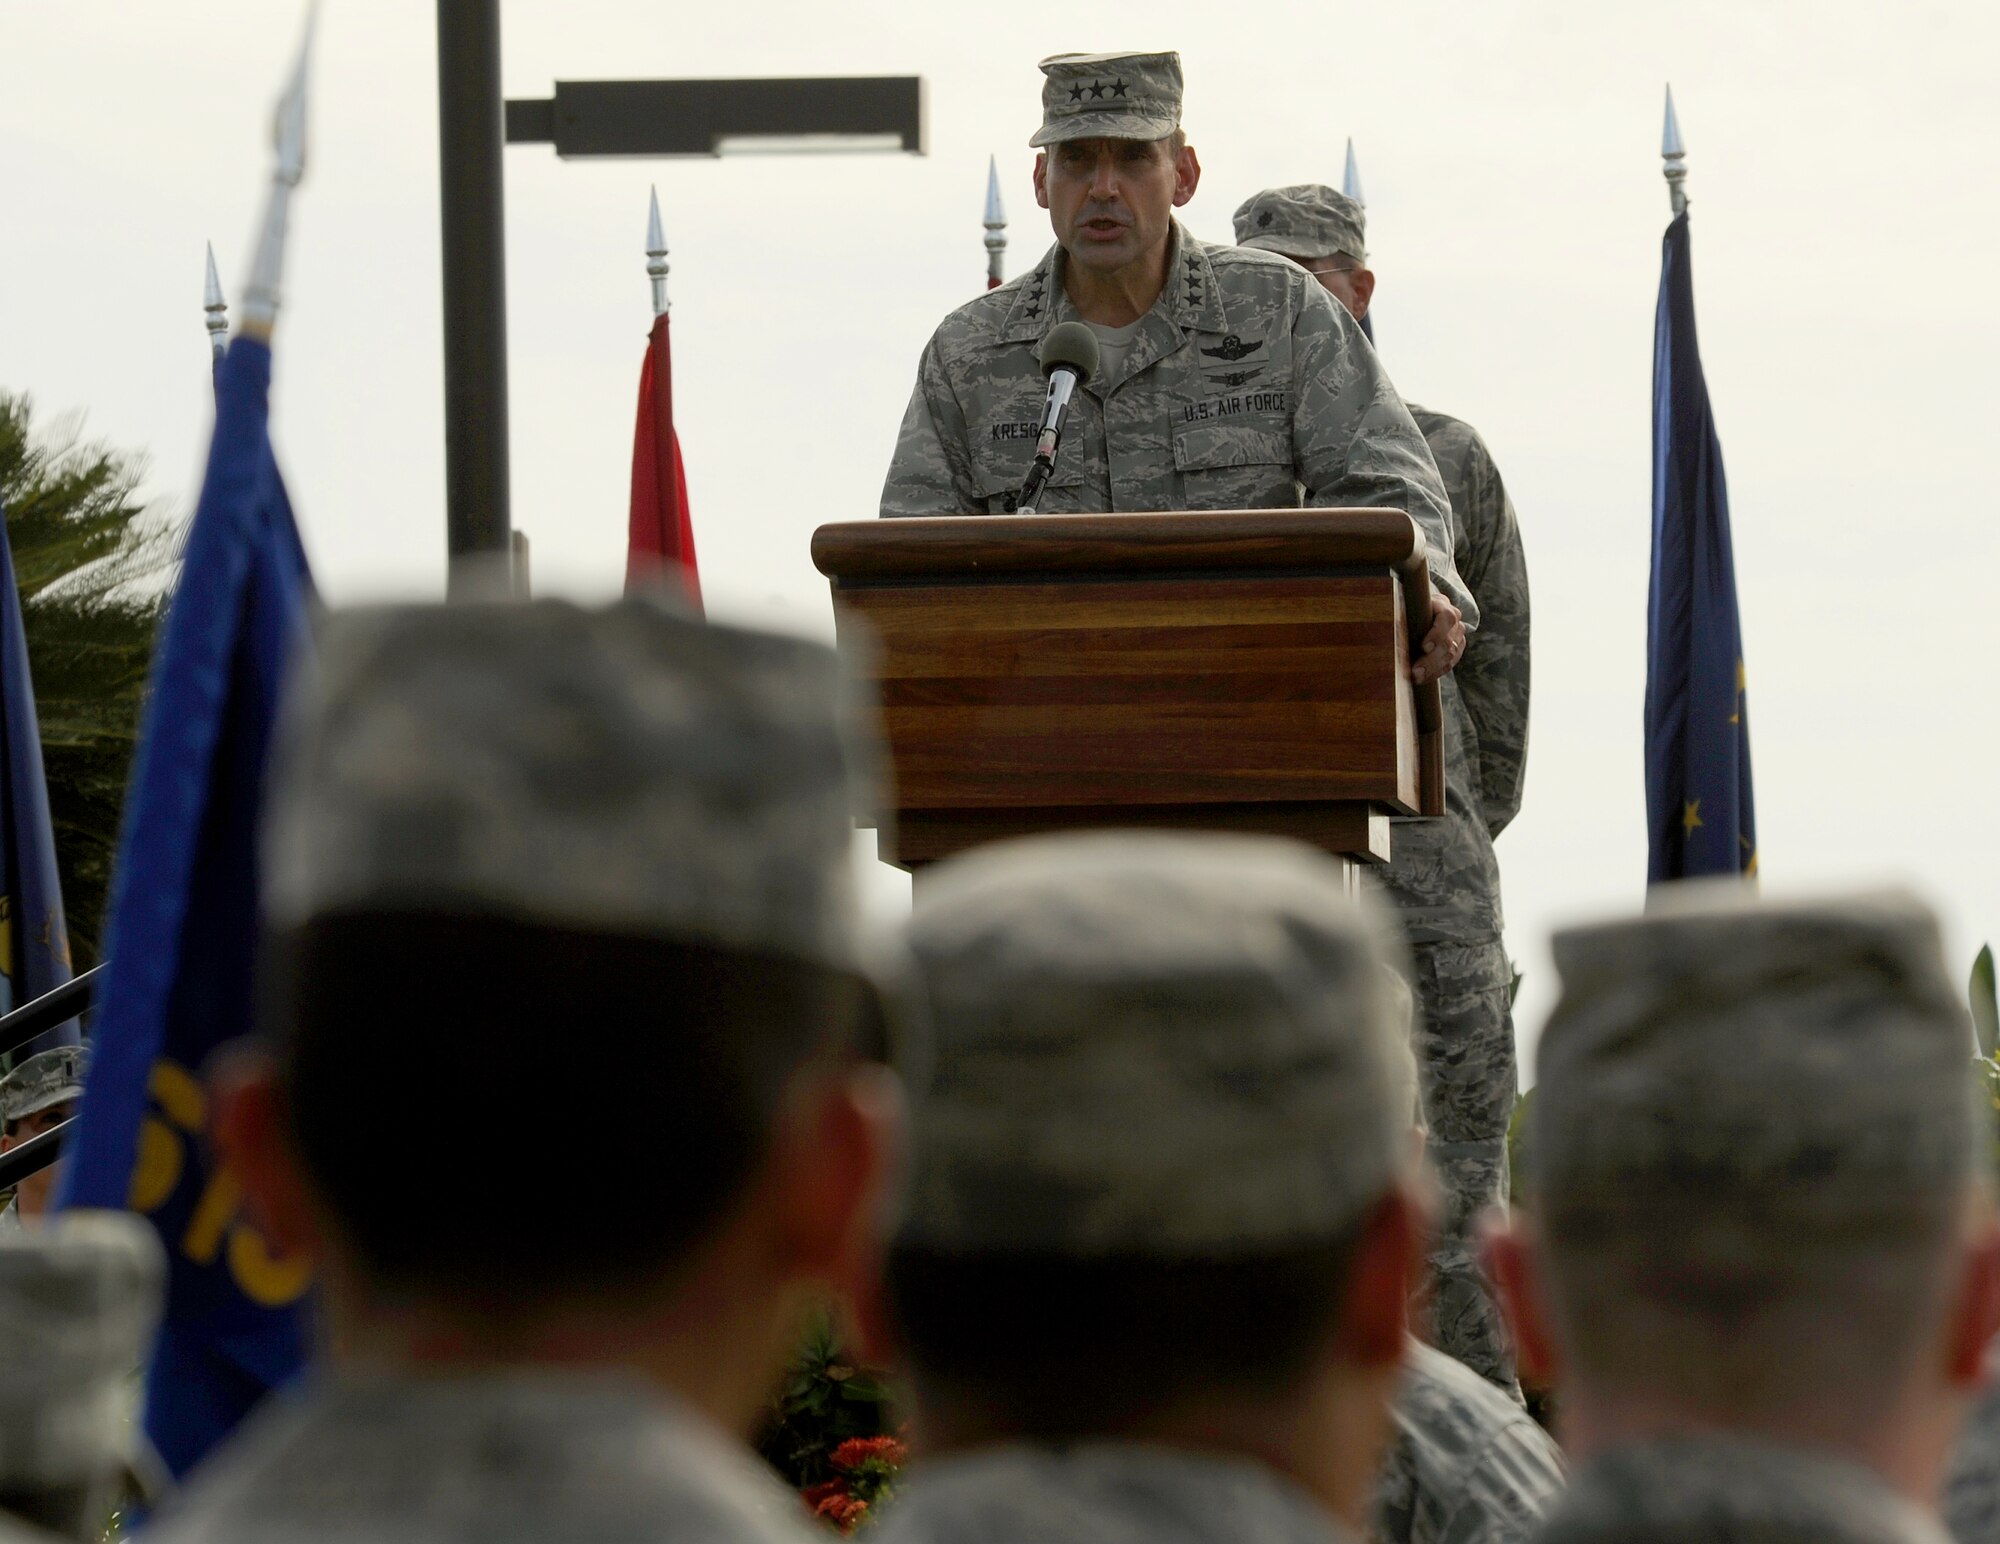 Lt. Gen. Stanley T. Kresge, former 13th Air Force commander, delivers a speech during the 13th Air Force inactivation ceremony Sept. 28, 2012, at Joint Base Pearl Harbor-Hickam, Hawaii. The 13th Air Force was PACOM’s operational component headquarters and has been consolidated into Pacific Air Forces at JBPH-Hickam, Hawaii. (U.S. Air Force photo/Tech. Sgt. Matthew McGovern) 
